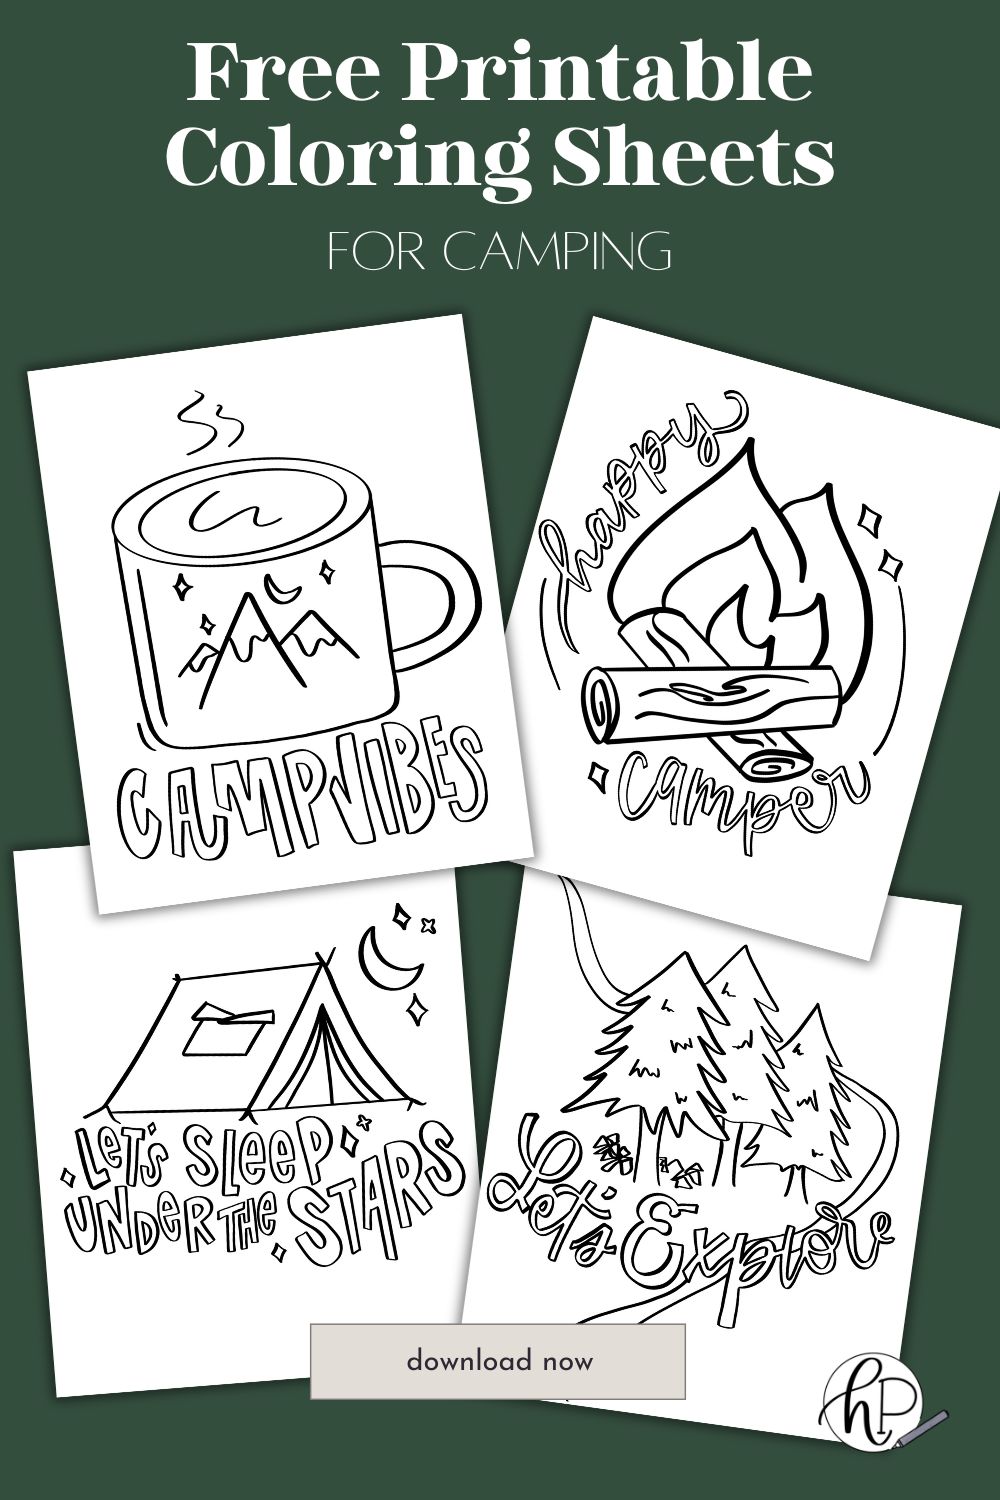 4 camping coloring sheets on green background with hand lettered phrases like 'camp vibes', 'happy camper' 'let's sleep under the stars' and 'let's explore' with line illustrations ready for coloring of a camp mug, campfire, tent under the night sky and trees with hiking trail. Text over reads: free printable coloring sheets for camping and a download button